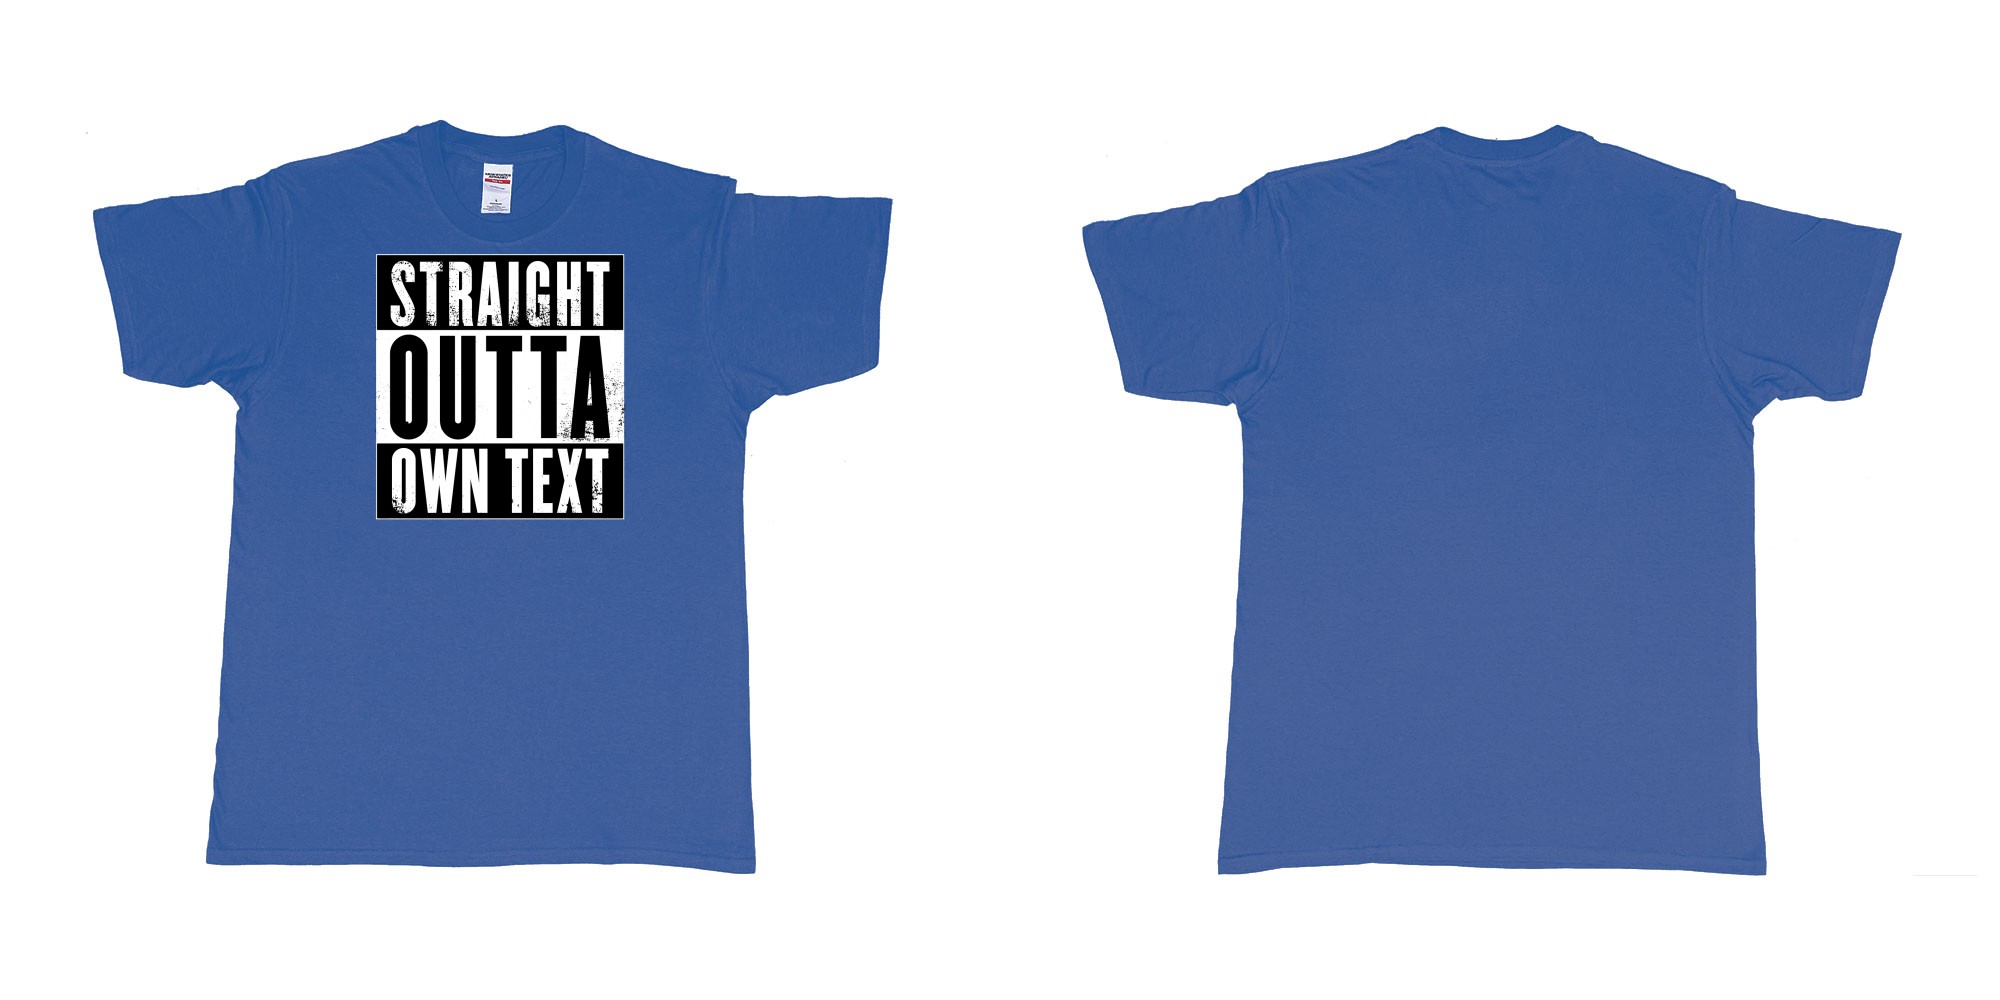 Custom tshirt design Straight Outta Compton in fabric color royal-blue choice your own text made in Bali by The Pirate Way